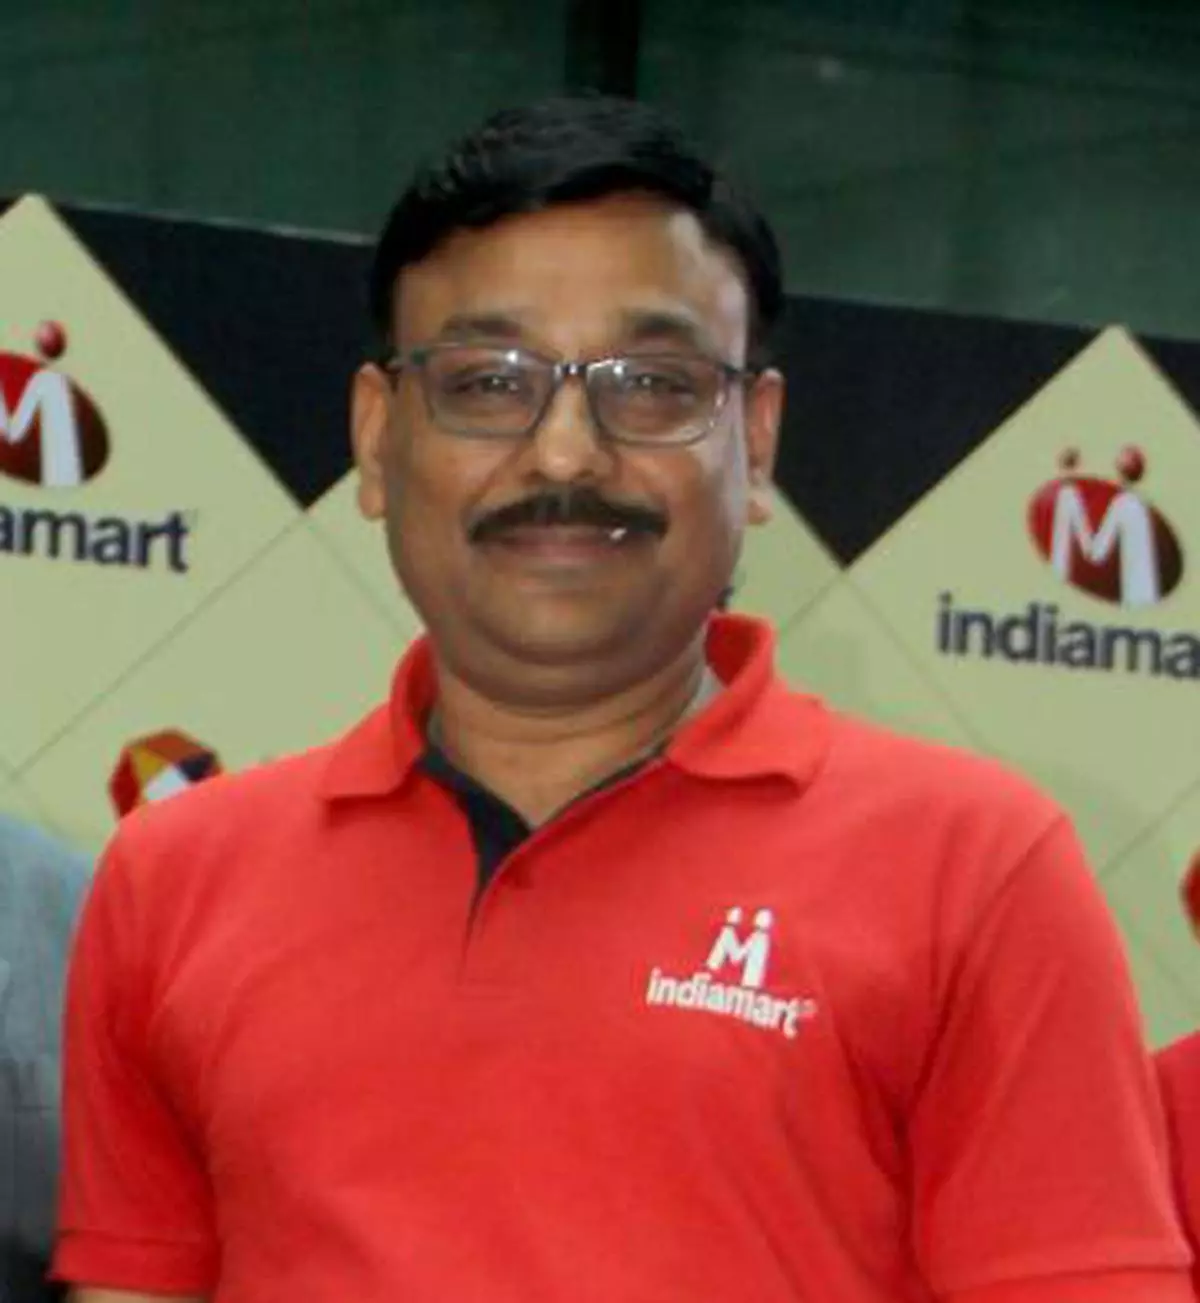 Dinesh Agarwal, Founder and MD of IndiaMART